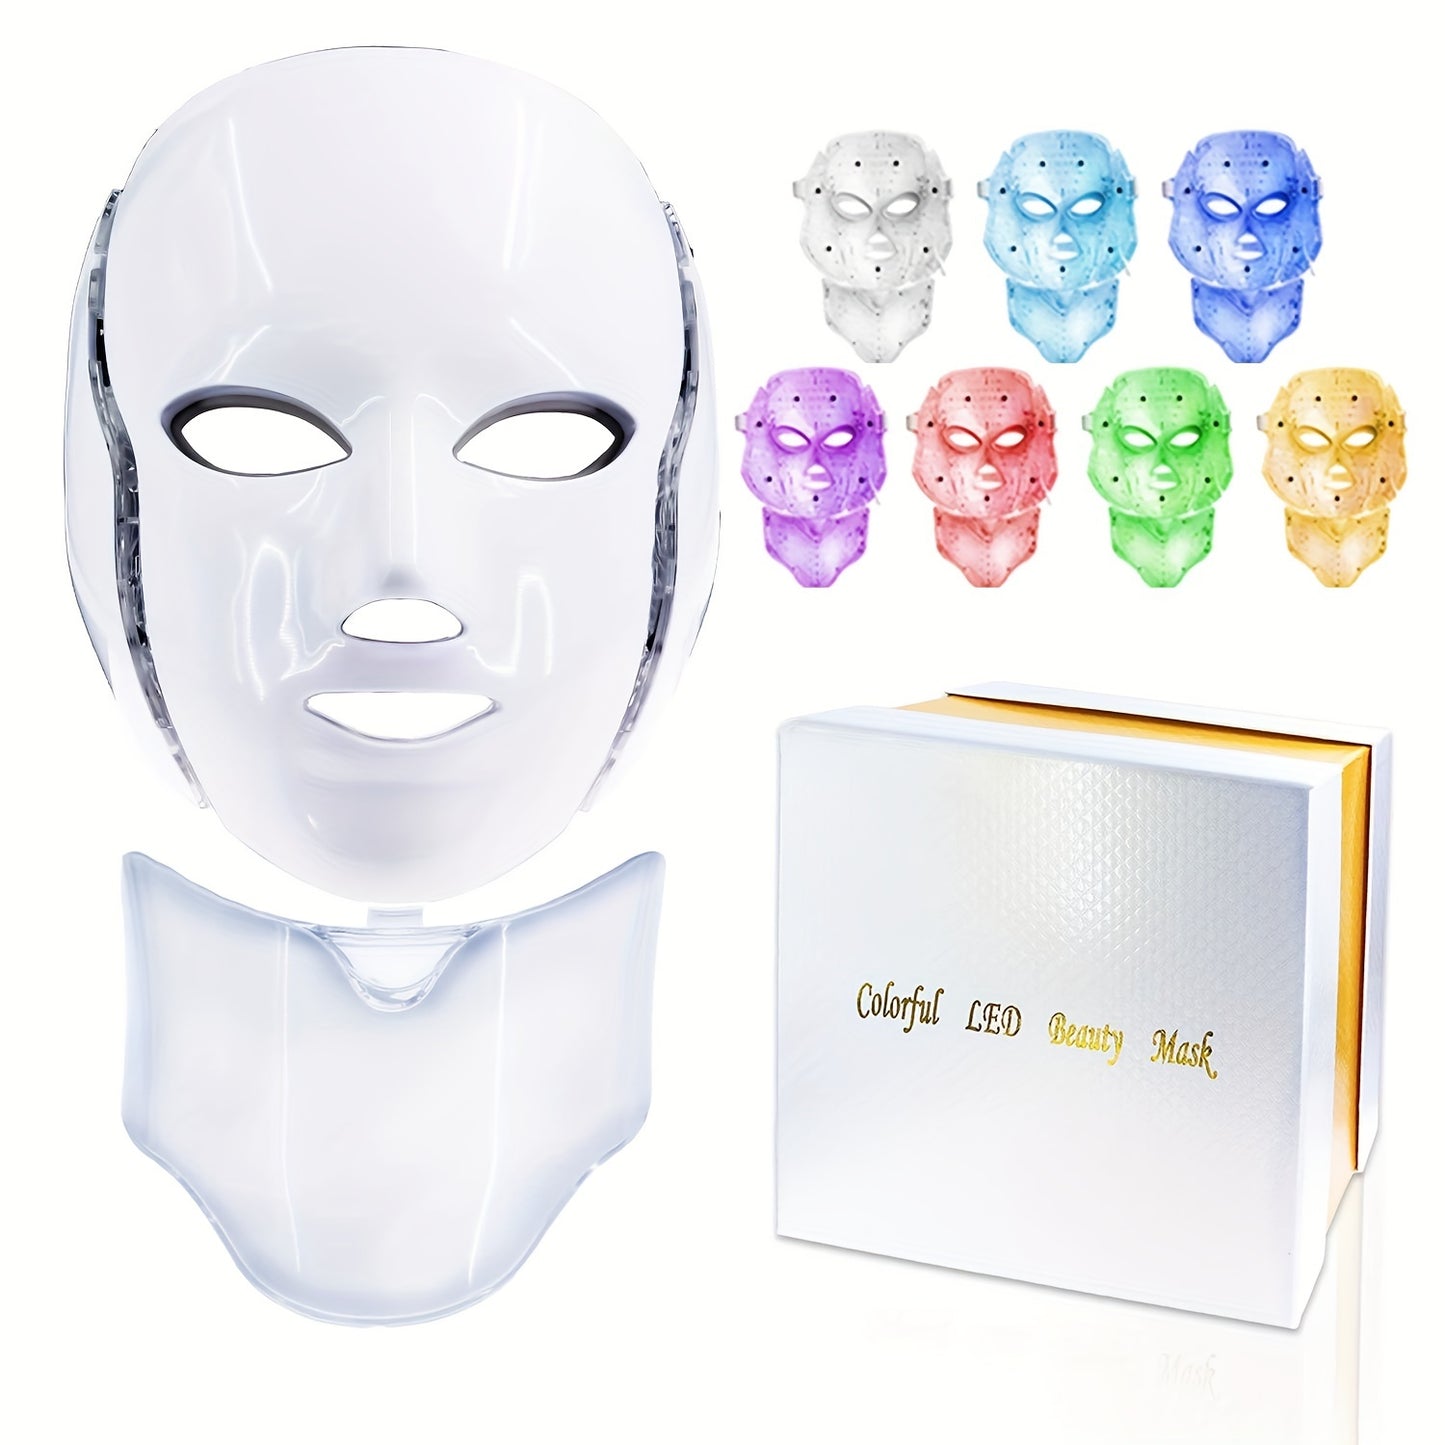 Colorful LED Beauty Mask 7 Colors LED Facial Mask With Neck LED Light Mask Skin care Beauty Device Face Massager